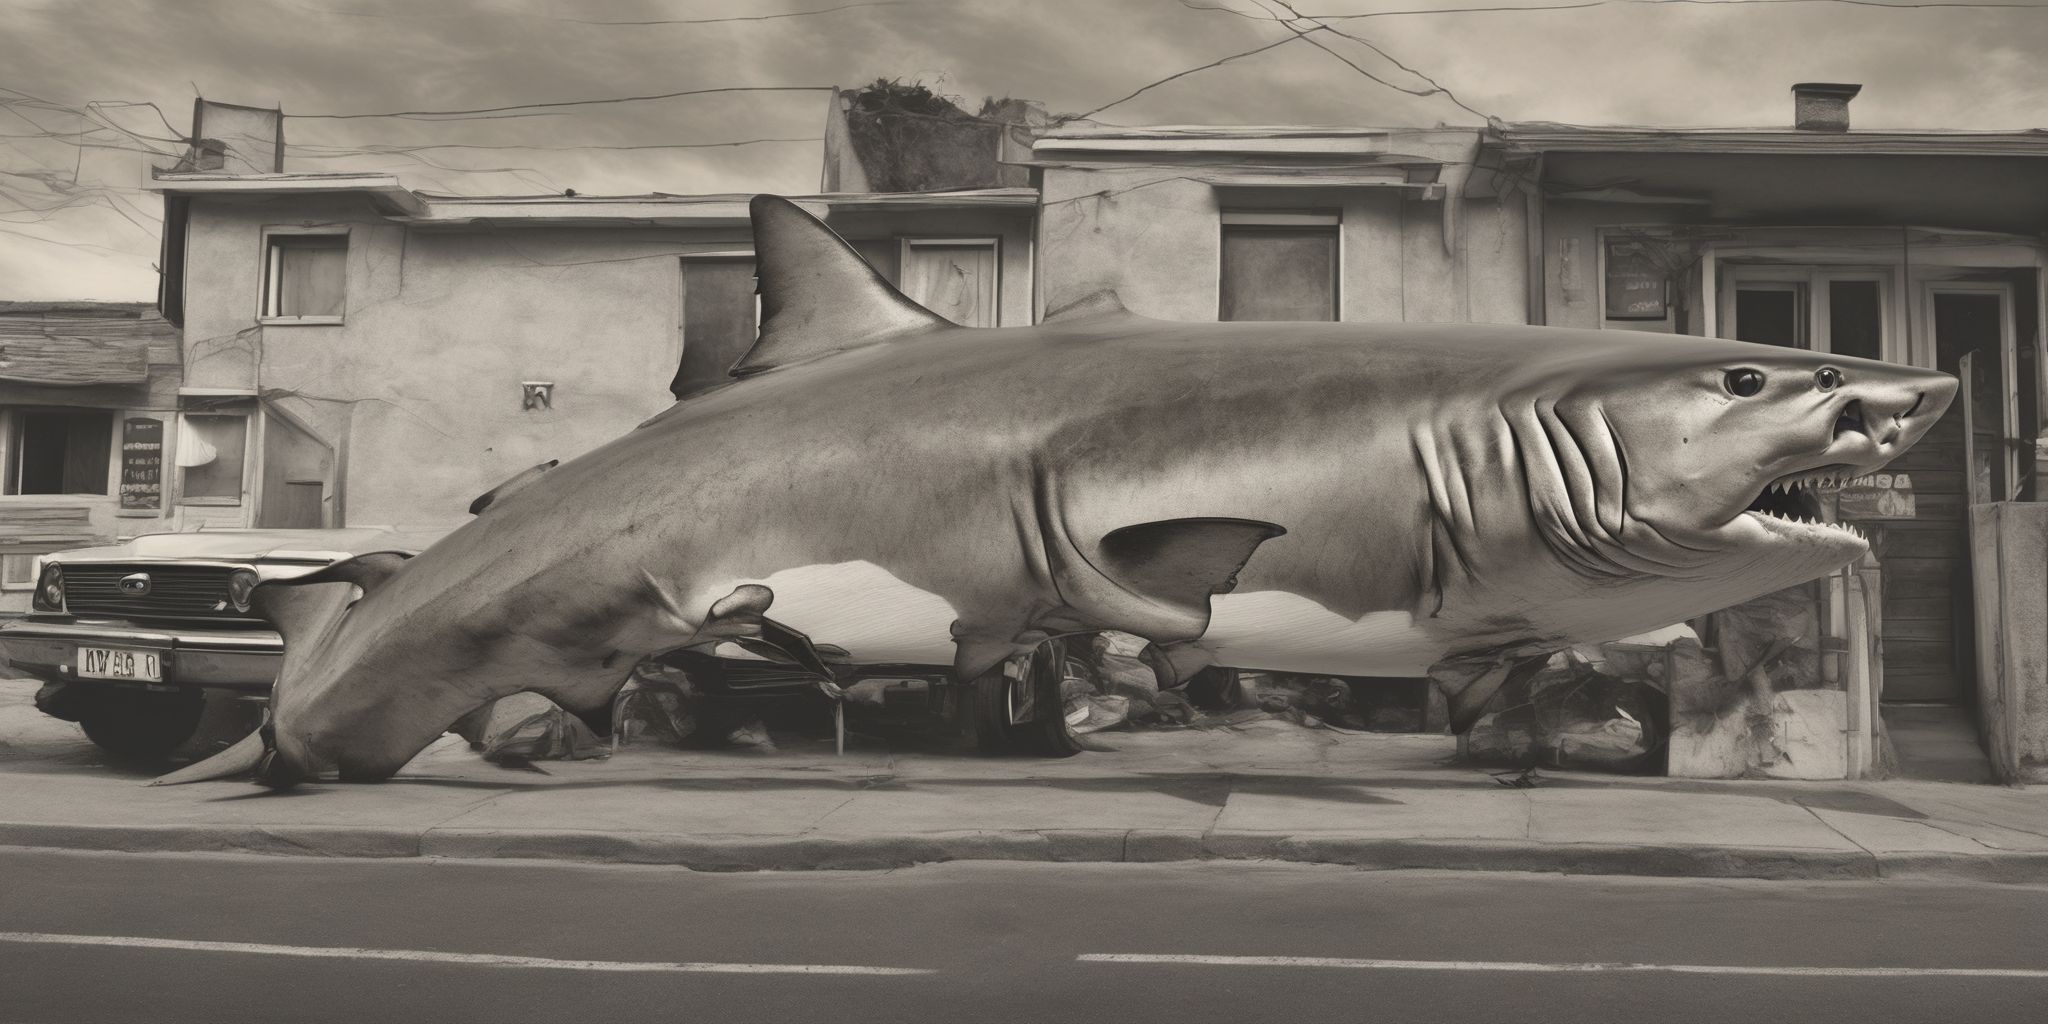 Loan shark  in realistic, photographic style